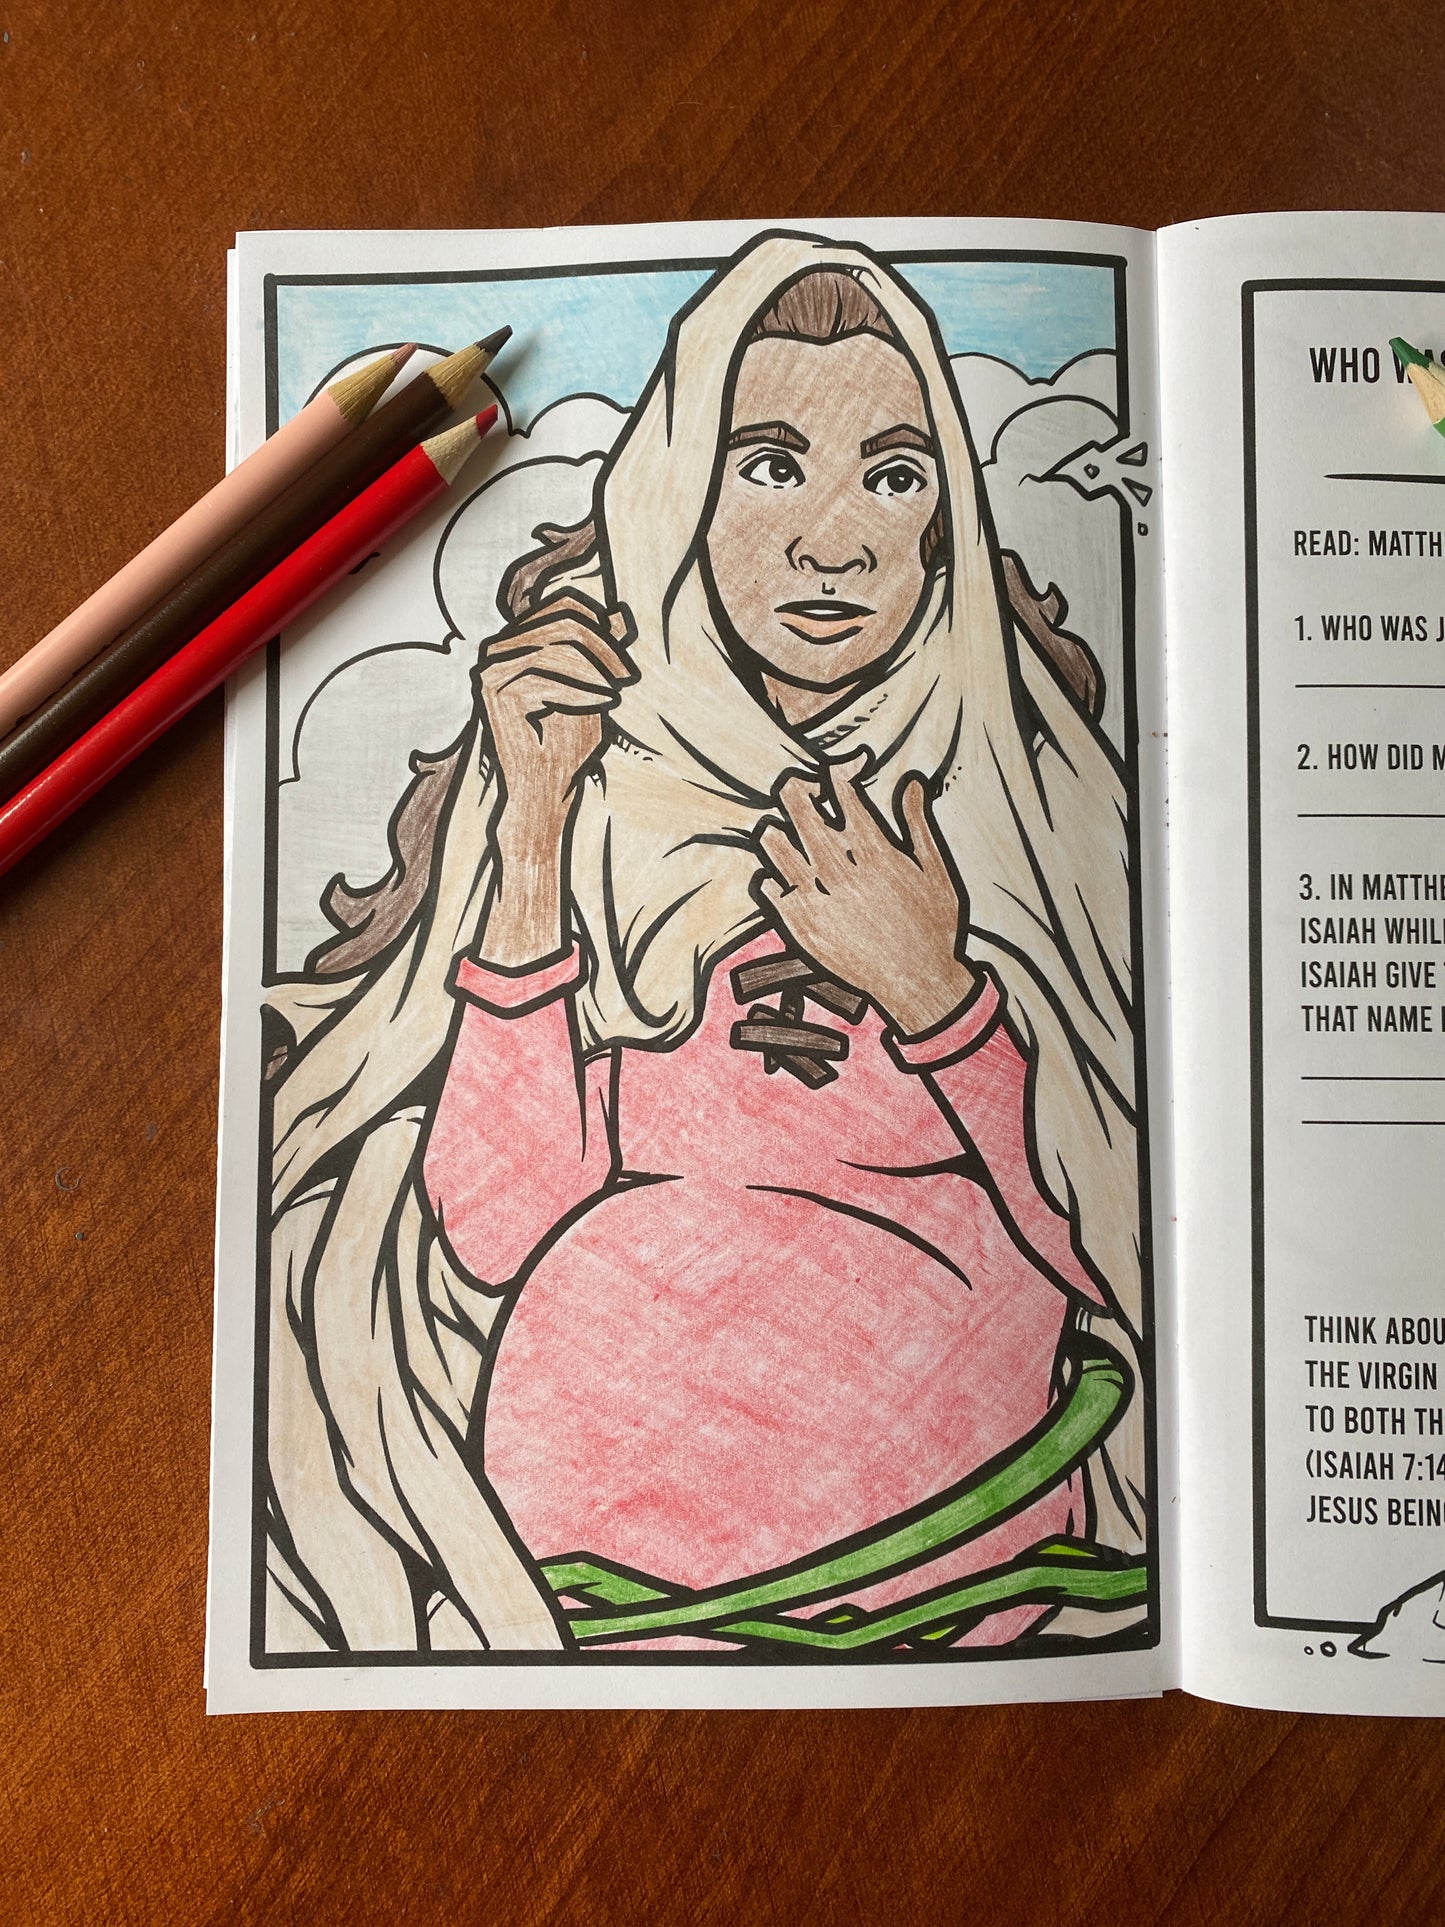 The Apostles Creed Coloring Book